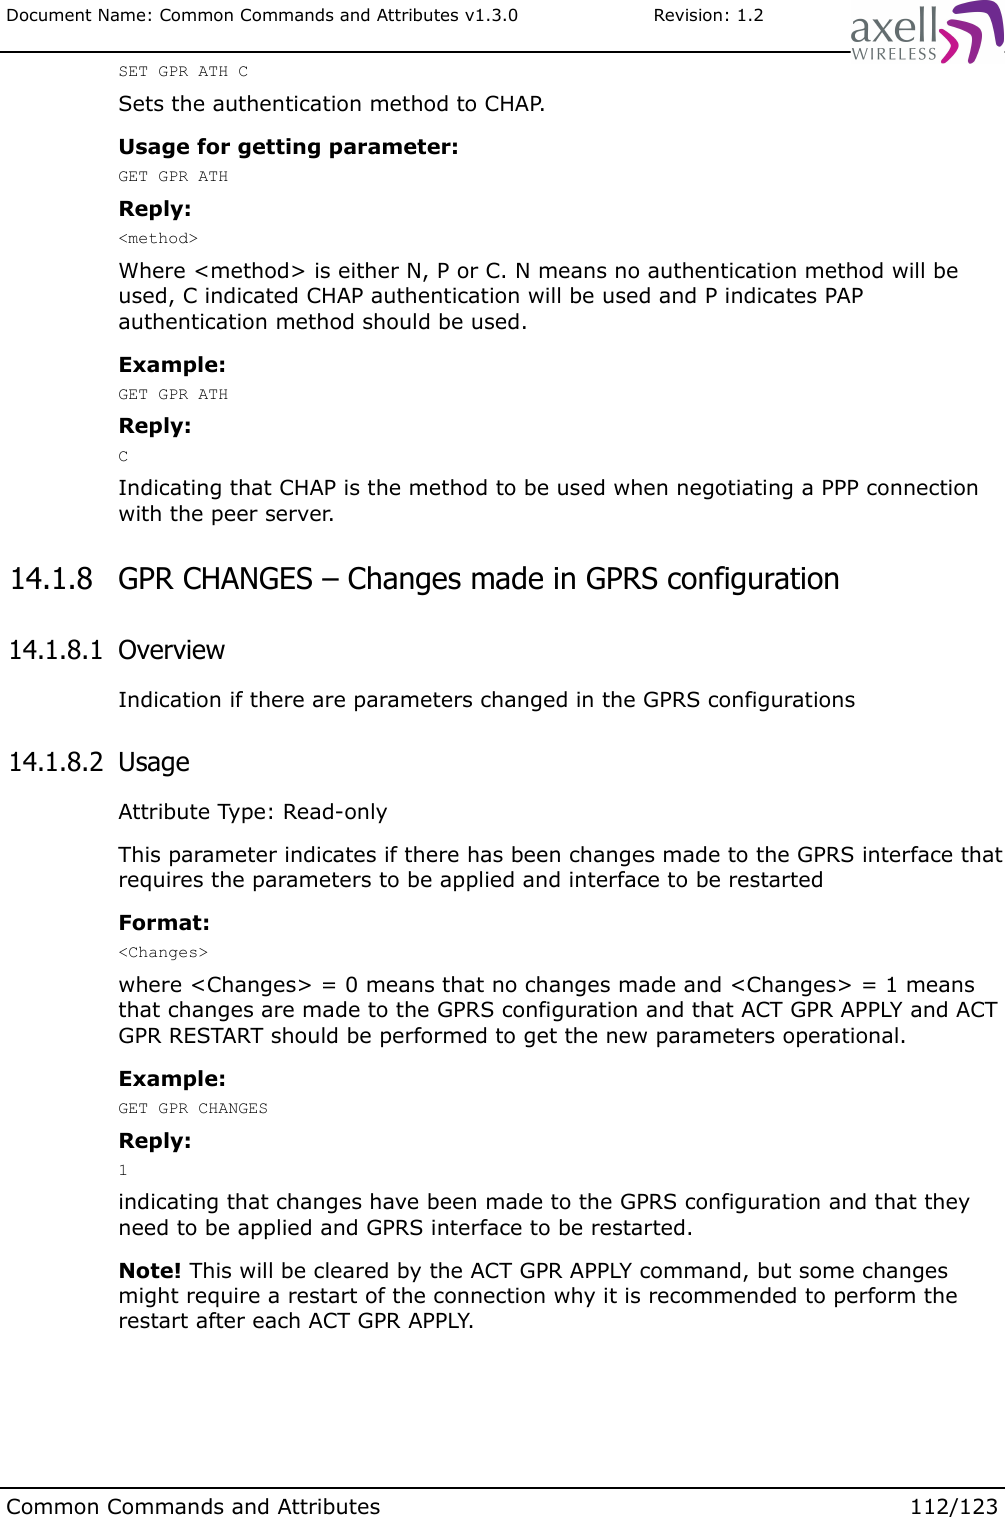 Document Name: Common Commands and Attributes v1.3.0                       Revision: 1.2SET GPR ATH CSets the authentication method to CHAP.Usage for getting parameter:GET GPR ATHReply:&lt;method&gt;Where &lt;method&gt; is either N, P or C. N means no authentication method will be used, C indicated CHAP authentication will be used and P indicates PAP authentication method should be used.Example:GET GPR ATHReply:CIndicating that CHAP is the method to be used when negotiating a PPP connection with the peer server. 14.1.8  GPR CHANGES – Changes made in GPRS configuration  14.1.8.1  OverviewIndication if there are parameters changed in the GPRS configurations 14.1.8.2  UsageAttribute Type: Read-onlyThis parameter indicates if there has been changes made to the GPRS interface that requires the parameters to be applied and interface to be restartedFormat:&lt;Changes&gt;where &lt;Changes&gt; = 0 means that no changes made and &lt;Changes&gt; = 1 means that changes are made to the GPRS configuration and that ACT GPR APPLY and ACT GPR RESTART should be performed to get the new parameters operational.Example:GET GPR CHANGESReply:1indicating that changes have been made to the GPRS configuration and that they need to be applied and GPRS interface to be restarted. Note! This will be cleared by the ACT GPR APPLY command, but some changes might require a restart of the connection why it is recommended to perform the restart after each ACT GPR APPLY.Common Commands and Attributes 112/123